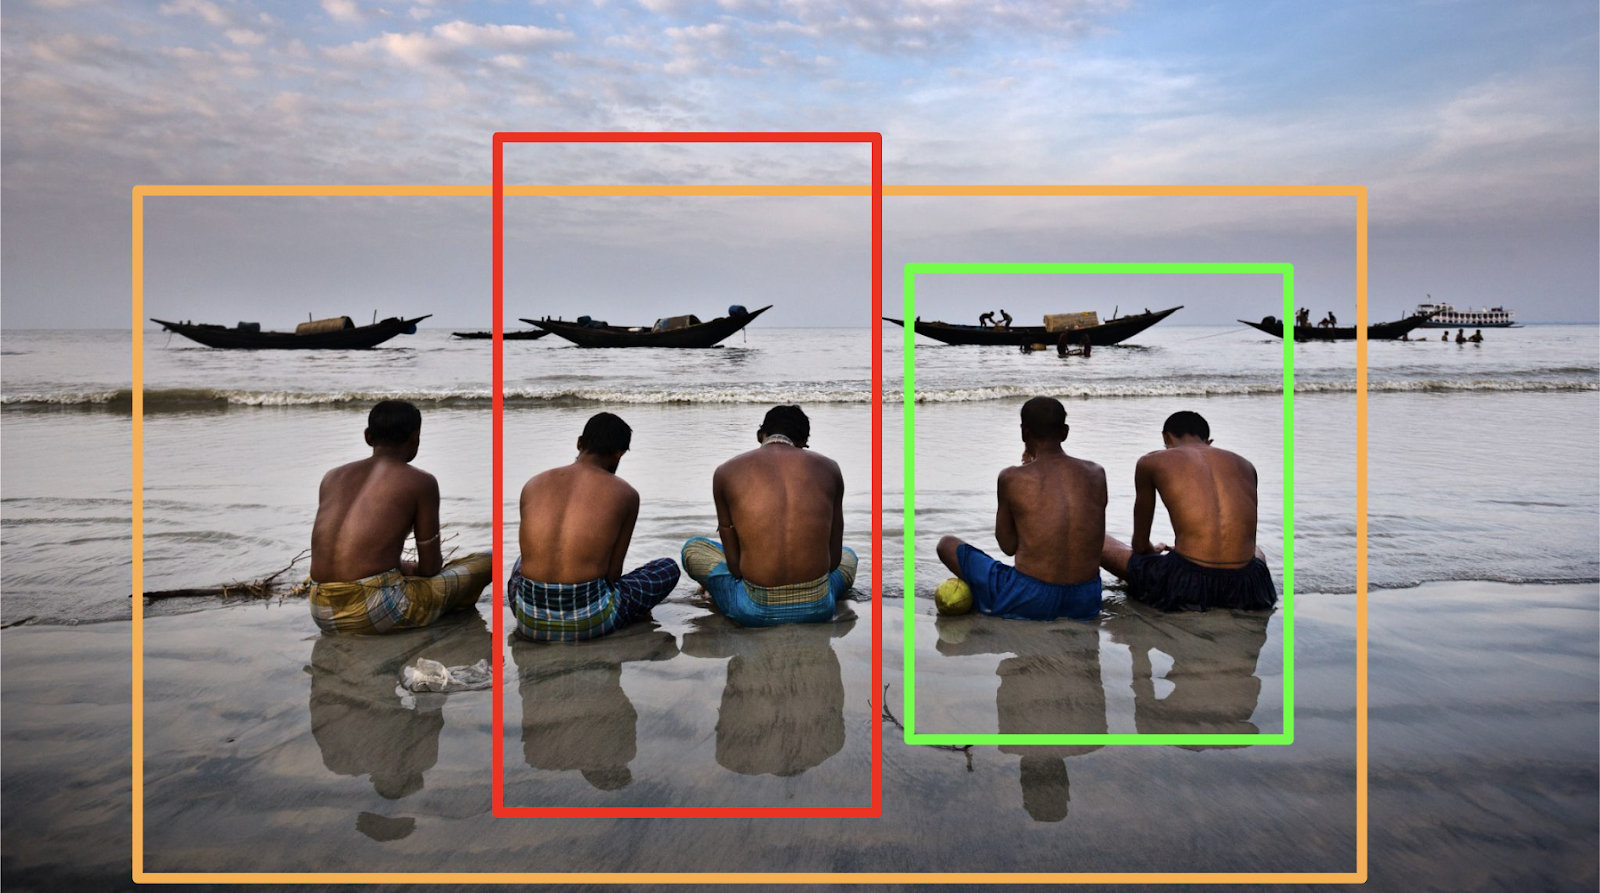 Three different image crop sizes are shown in coloured squares on top of an image of fishermen praying on a beach in Bangladesh.